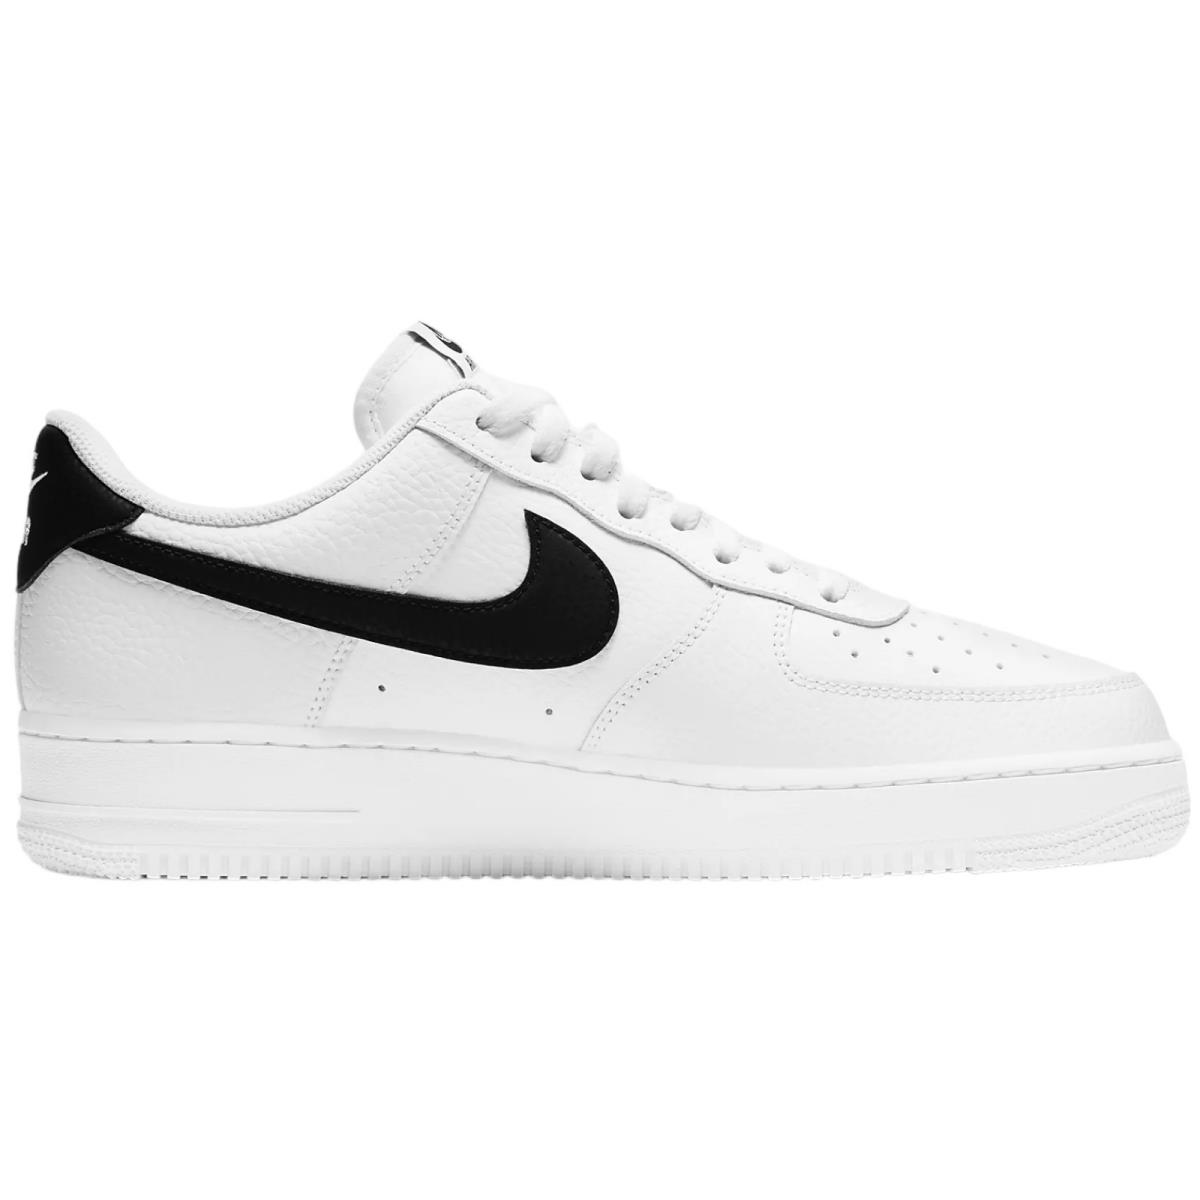 Nike Air Force 1 `07 Men`s Casual Shoes All Colors US Sizes 7-14 White/Black